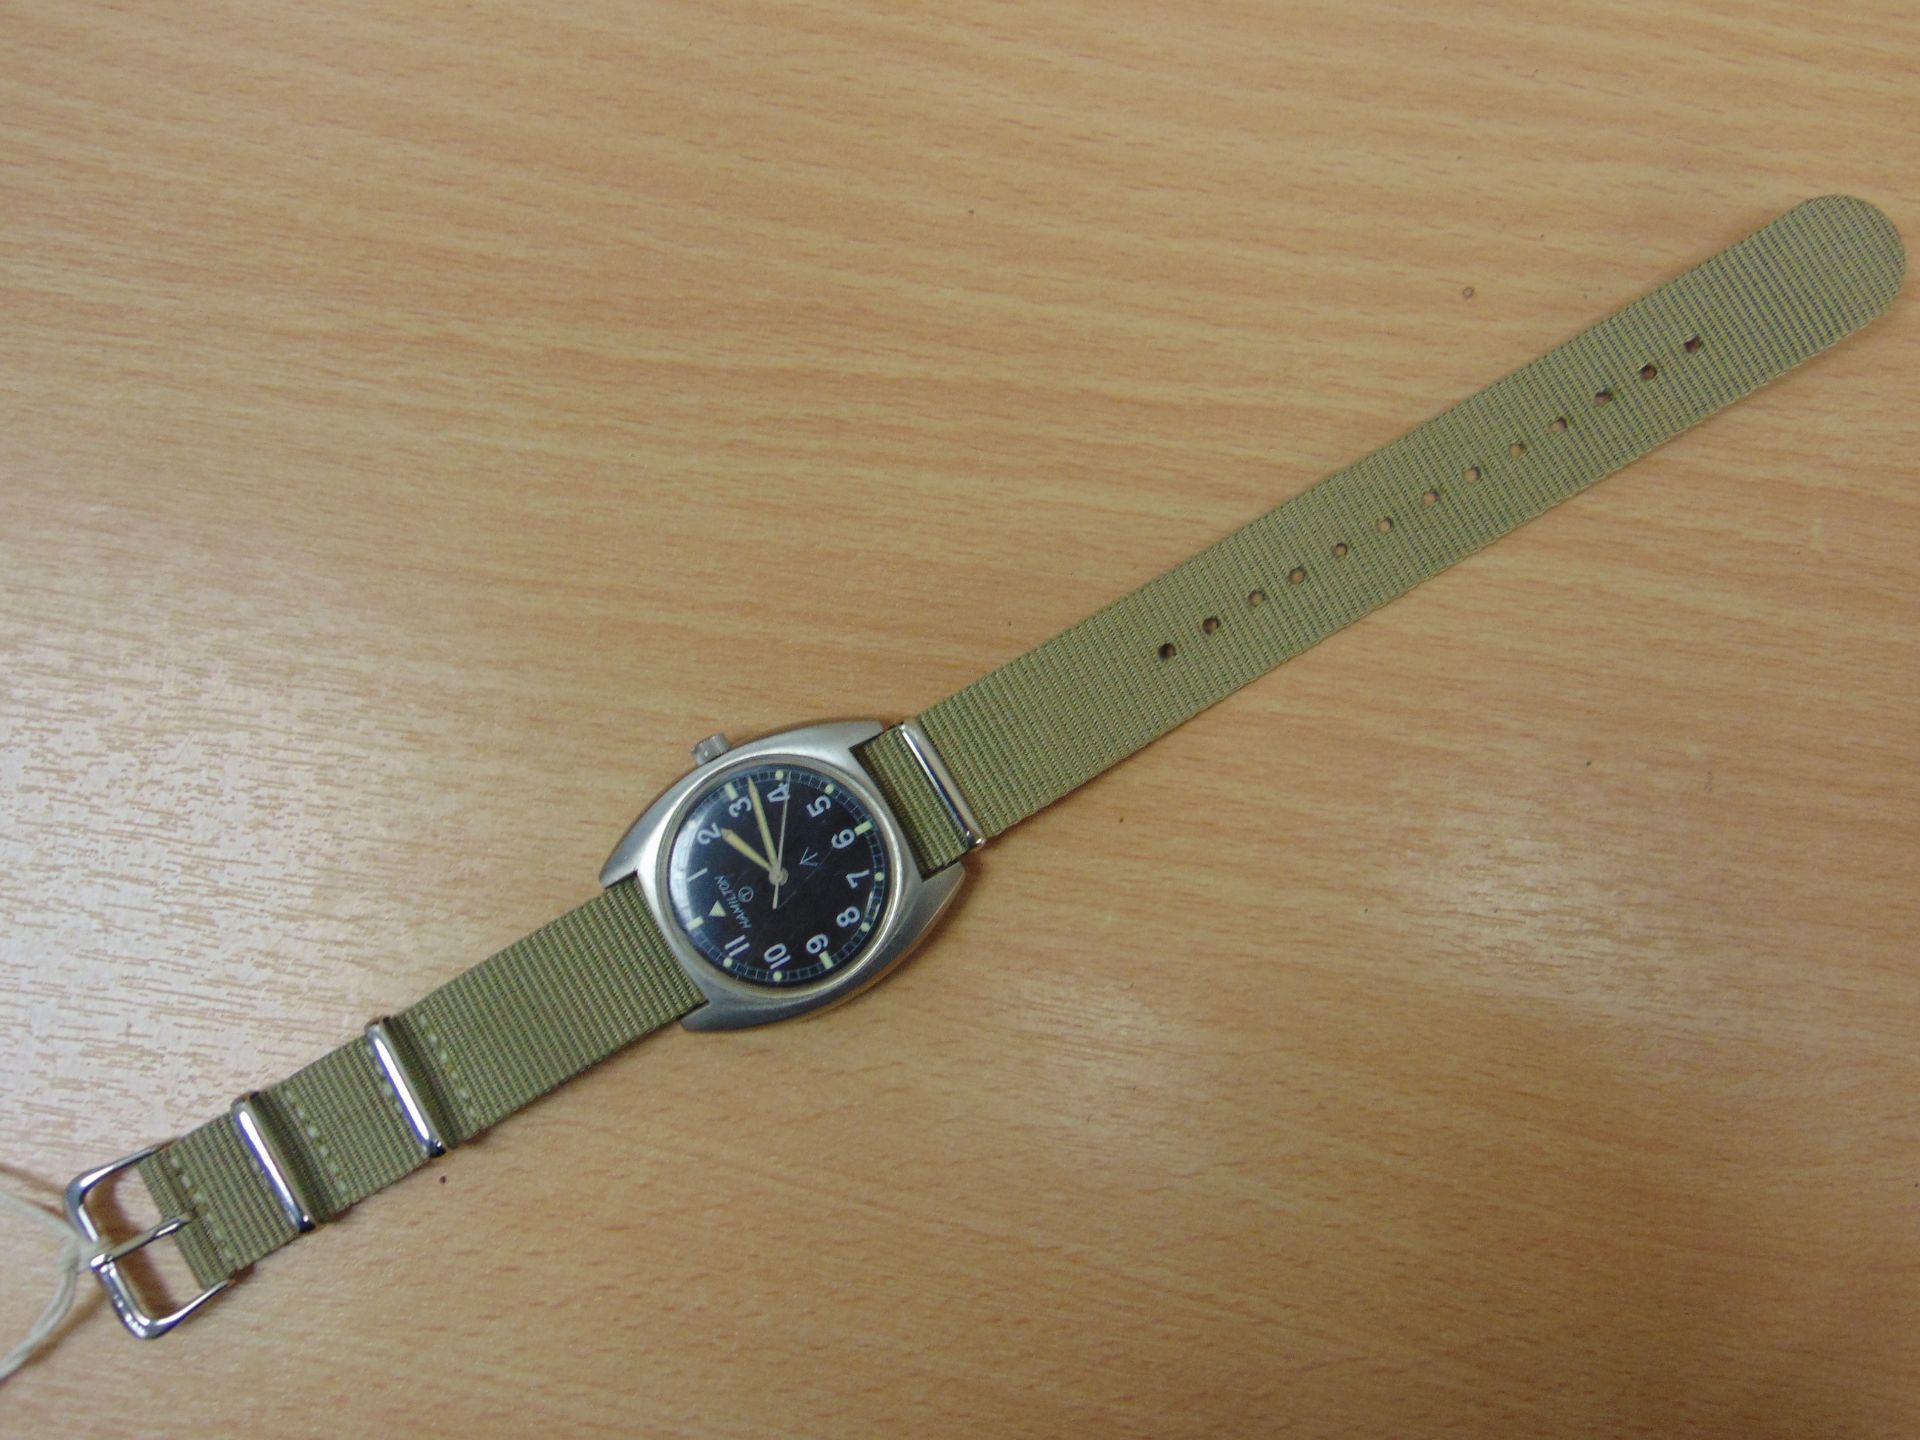 VERY VERY RARE!!!! HAMILTON MECHANICAL W10 SERVICE WATCH DATED 1973 UNISSUED CONDITION - Image 10 of 11